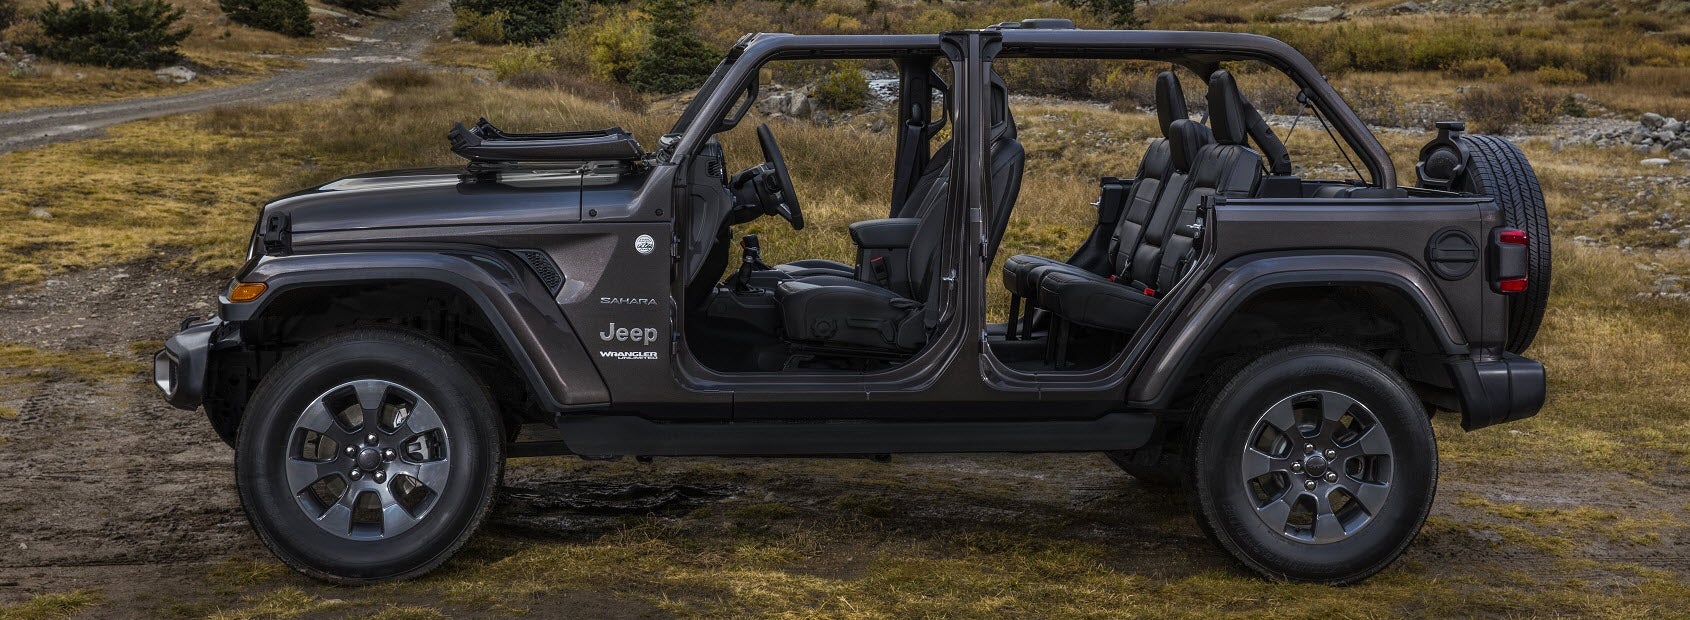 Jeep Wrangler with fold-down windshield and doors removed